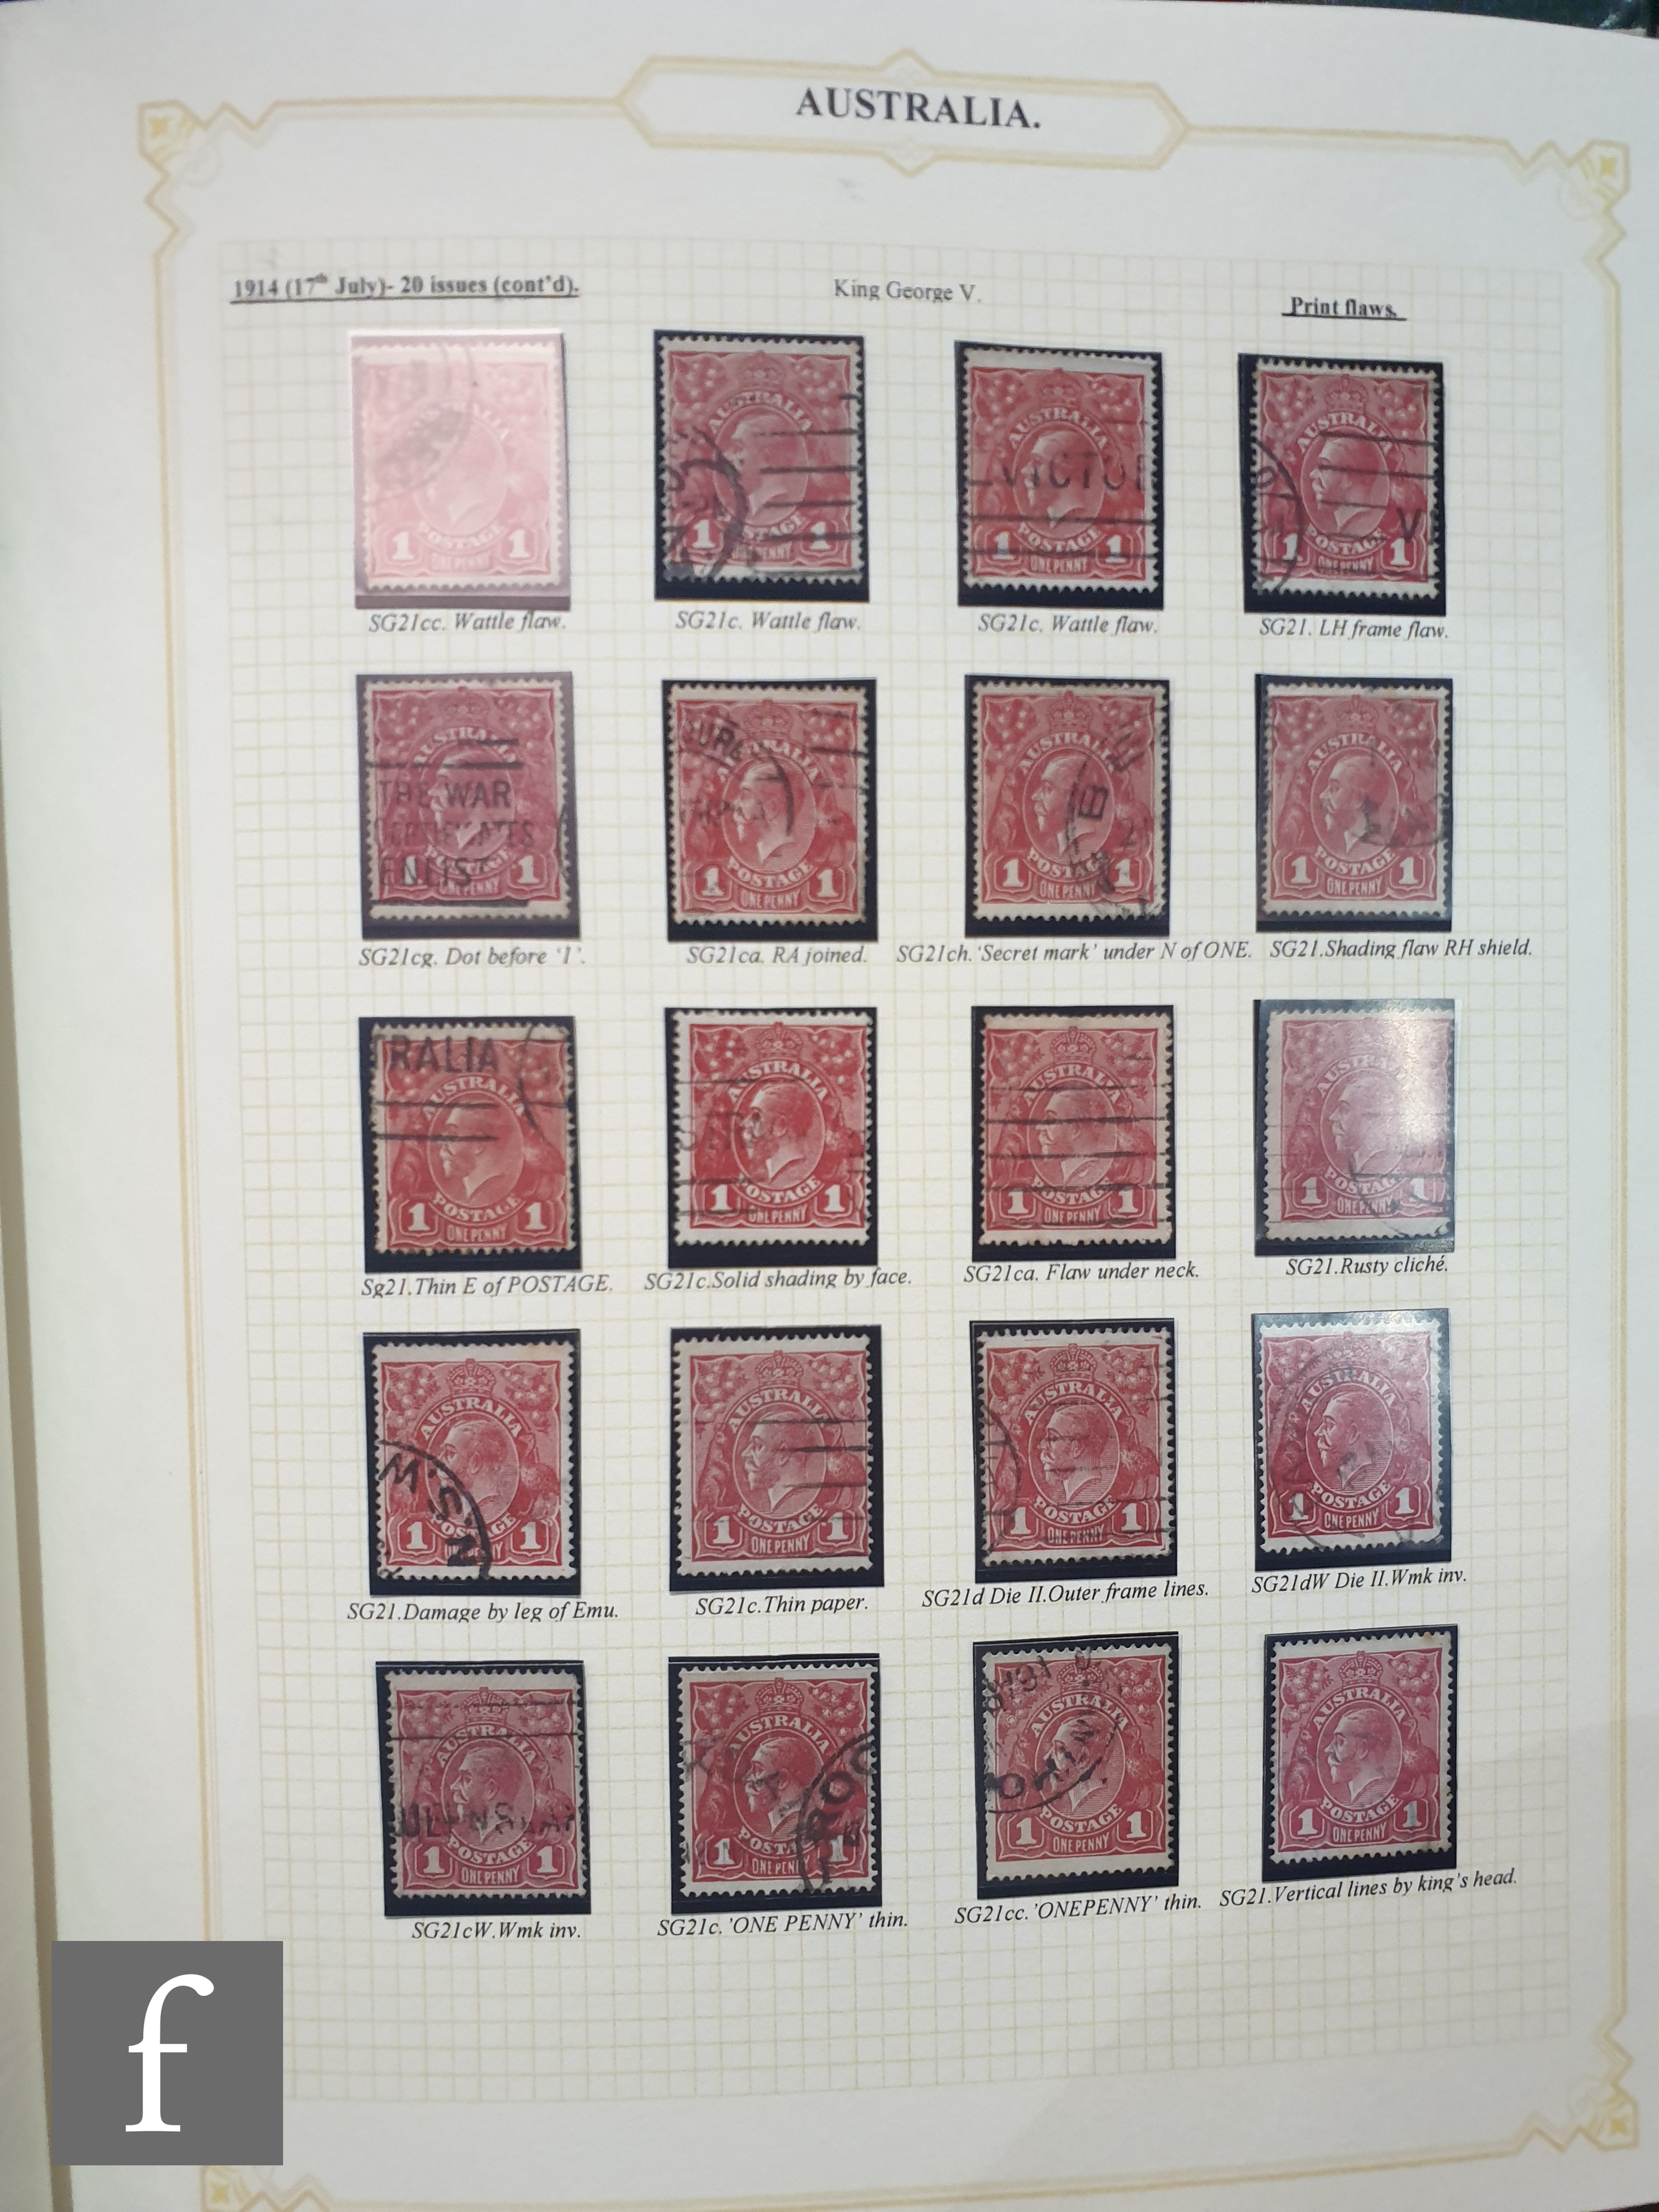 A collection of Australian postage stamps, George V to QEII, used, contained within a green